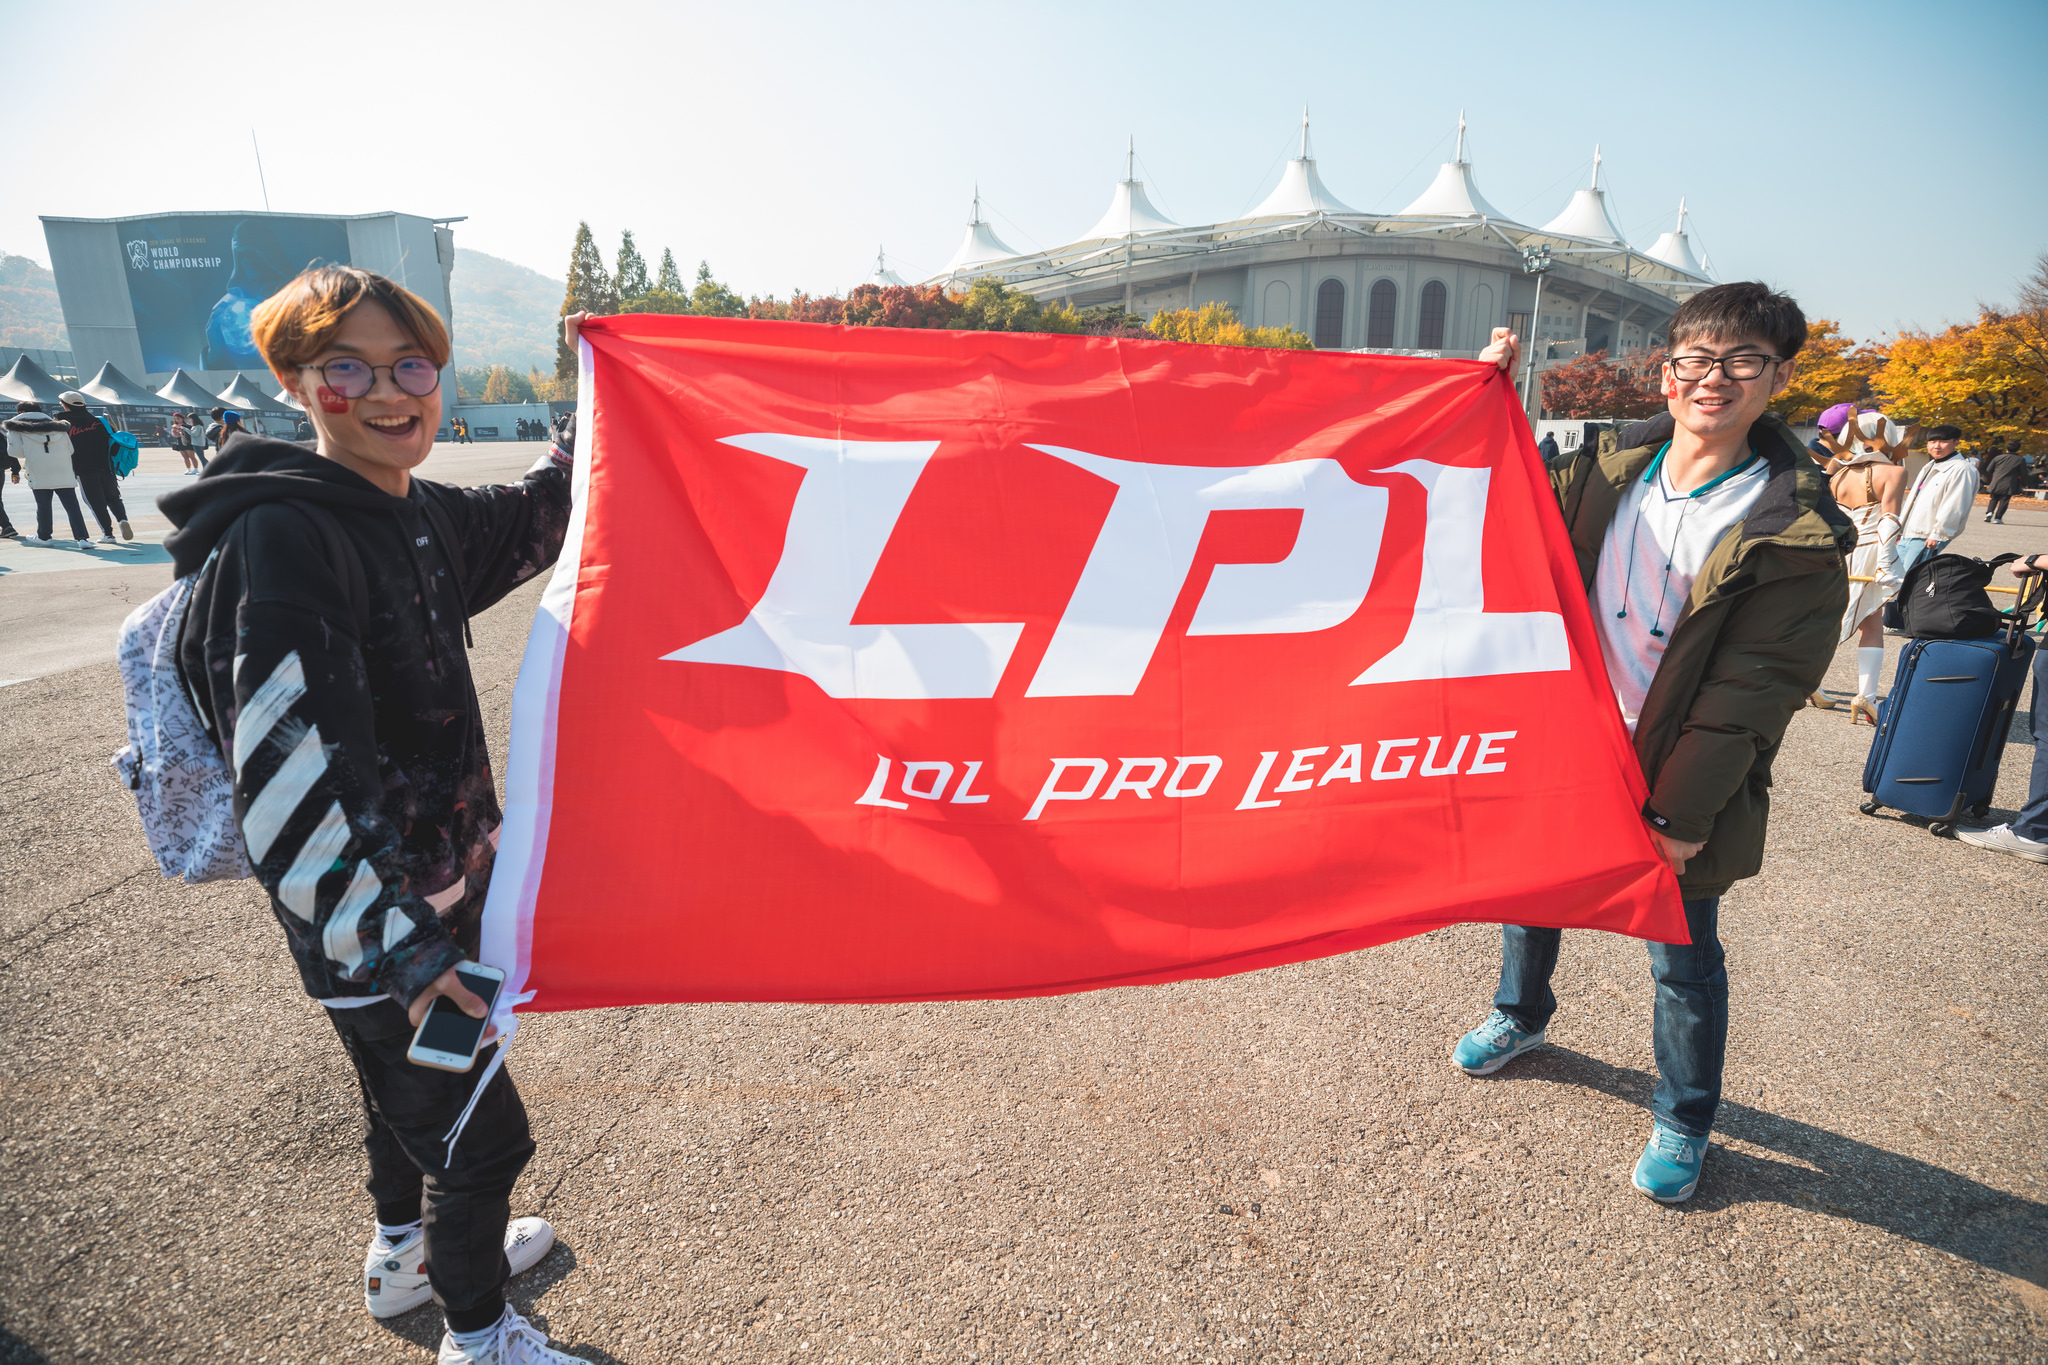 LPL – LGD Gaming Clean Swept Invictus Gaming In League Pro League Summer Split Playoffs